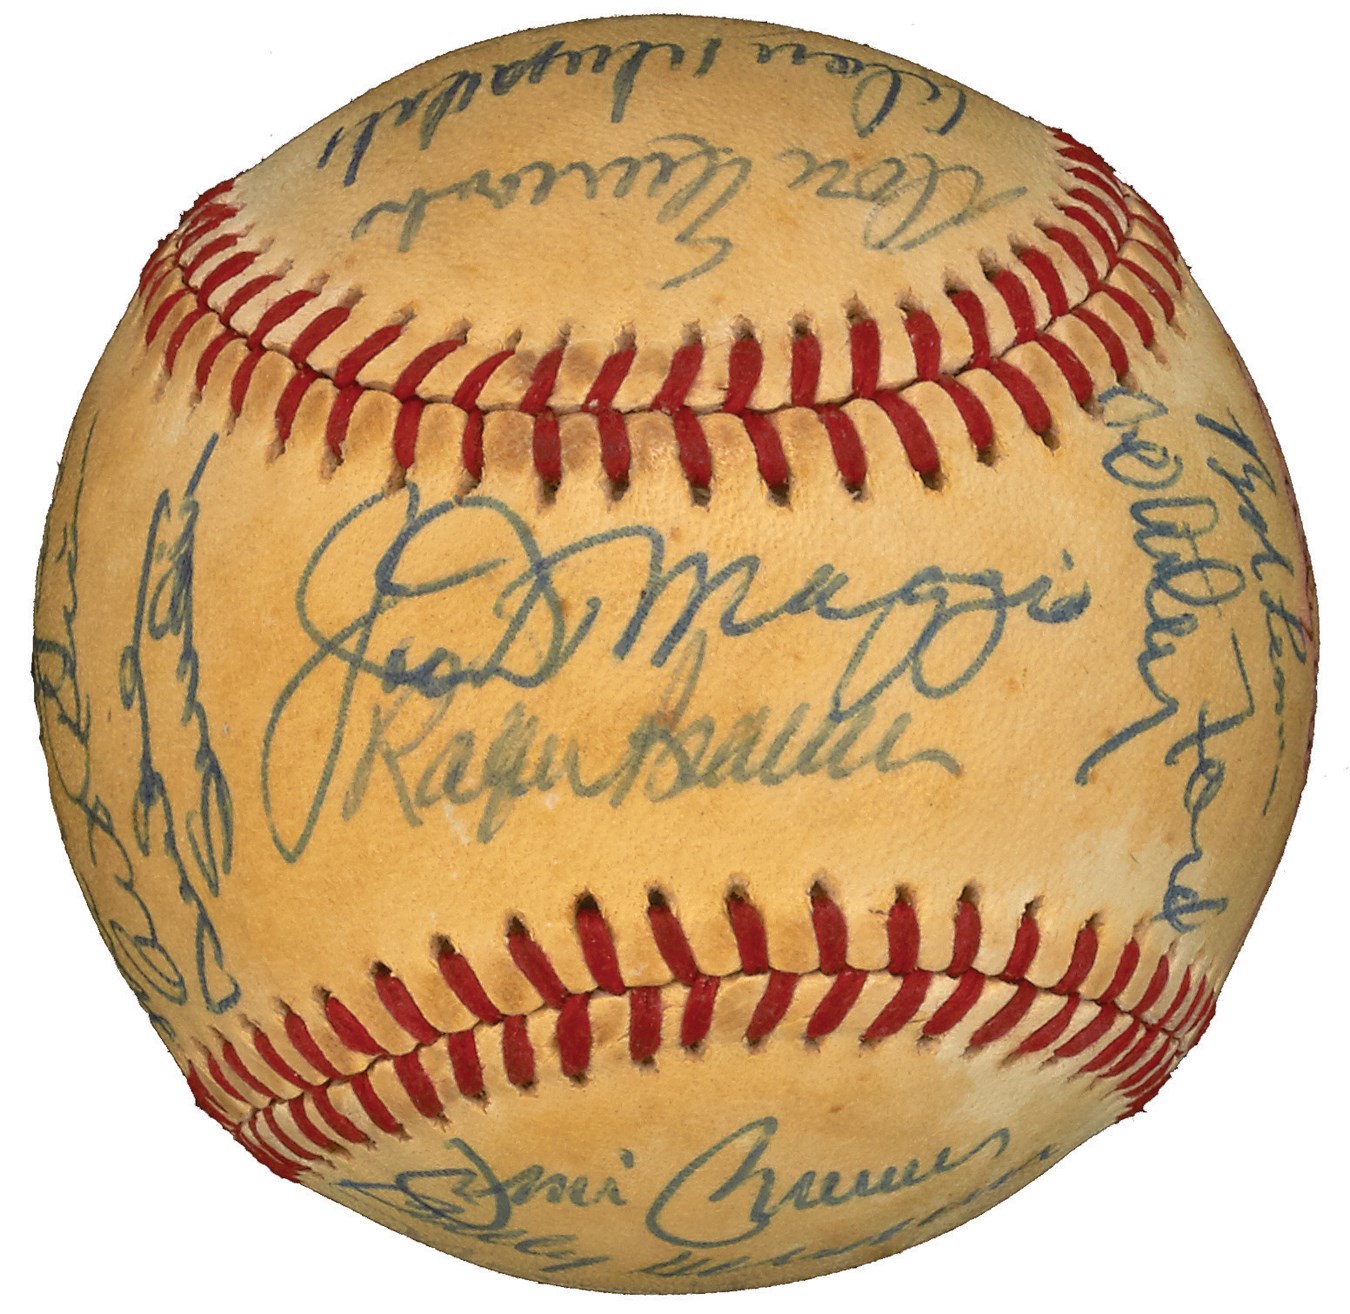 Hall Of Fame Signed Baseball with Maris, DiMaggio, Koufax & More (24)